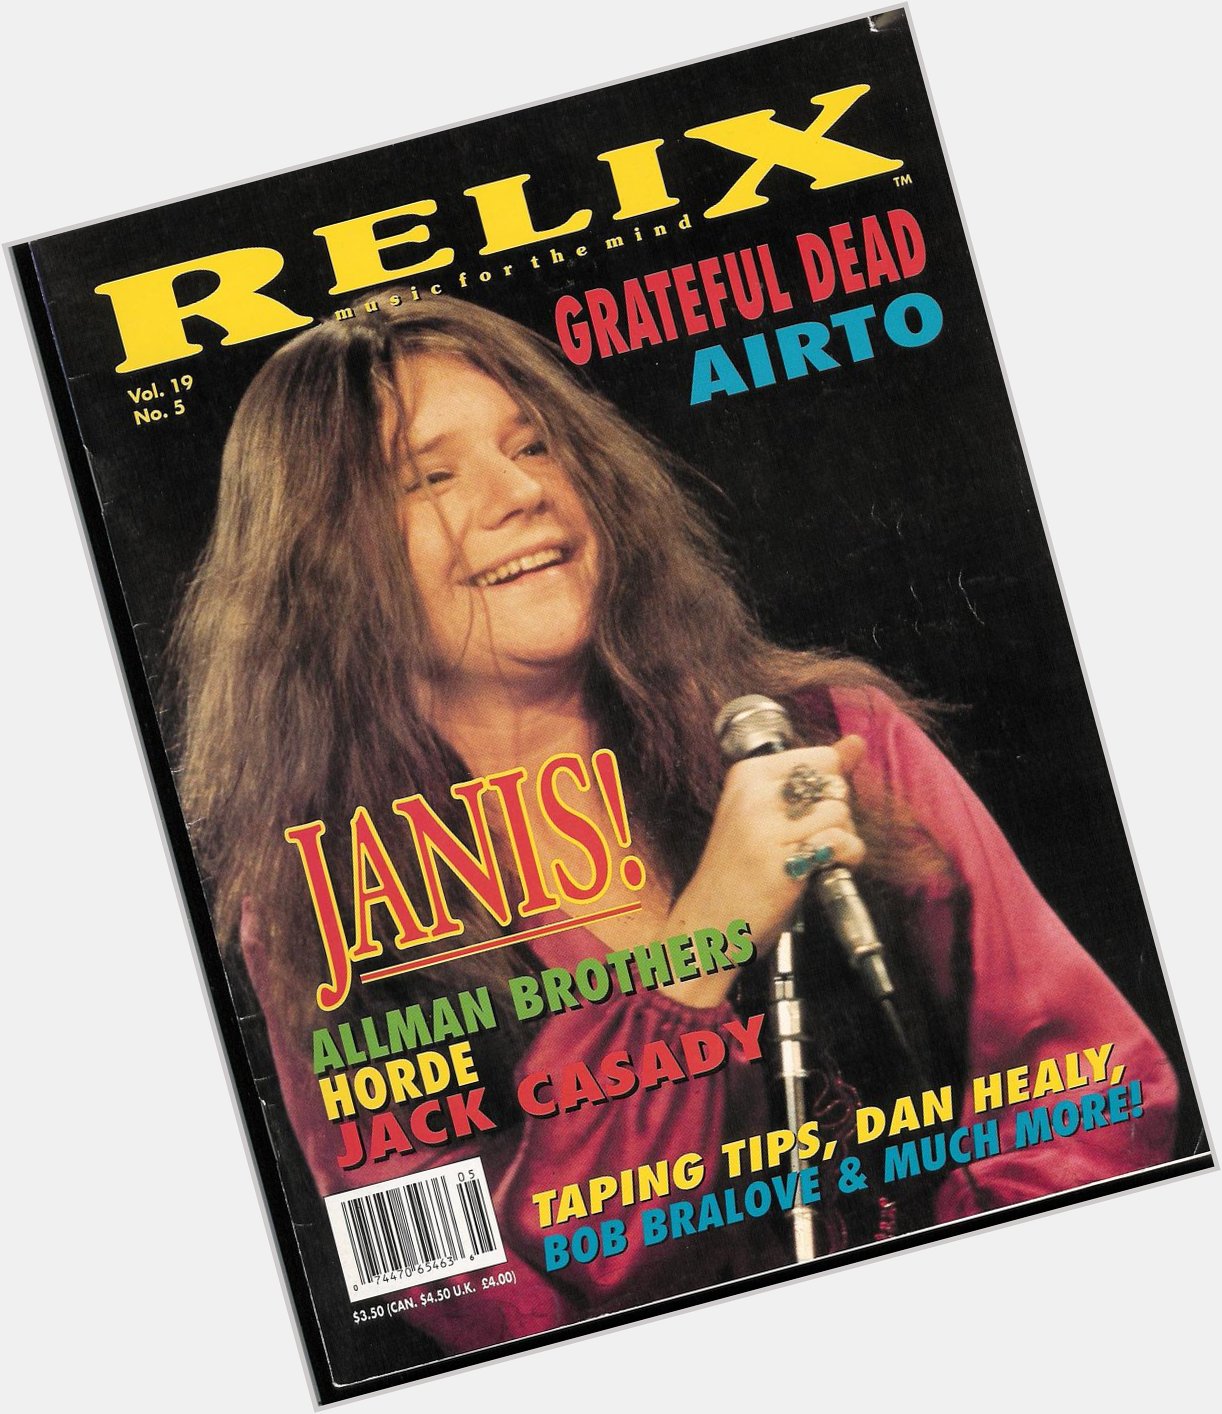 Happy birthday to the one and only Janis Joplin! 